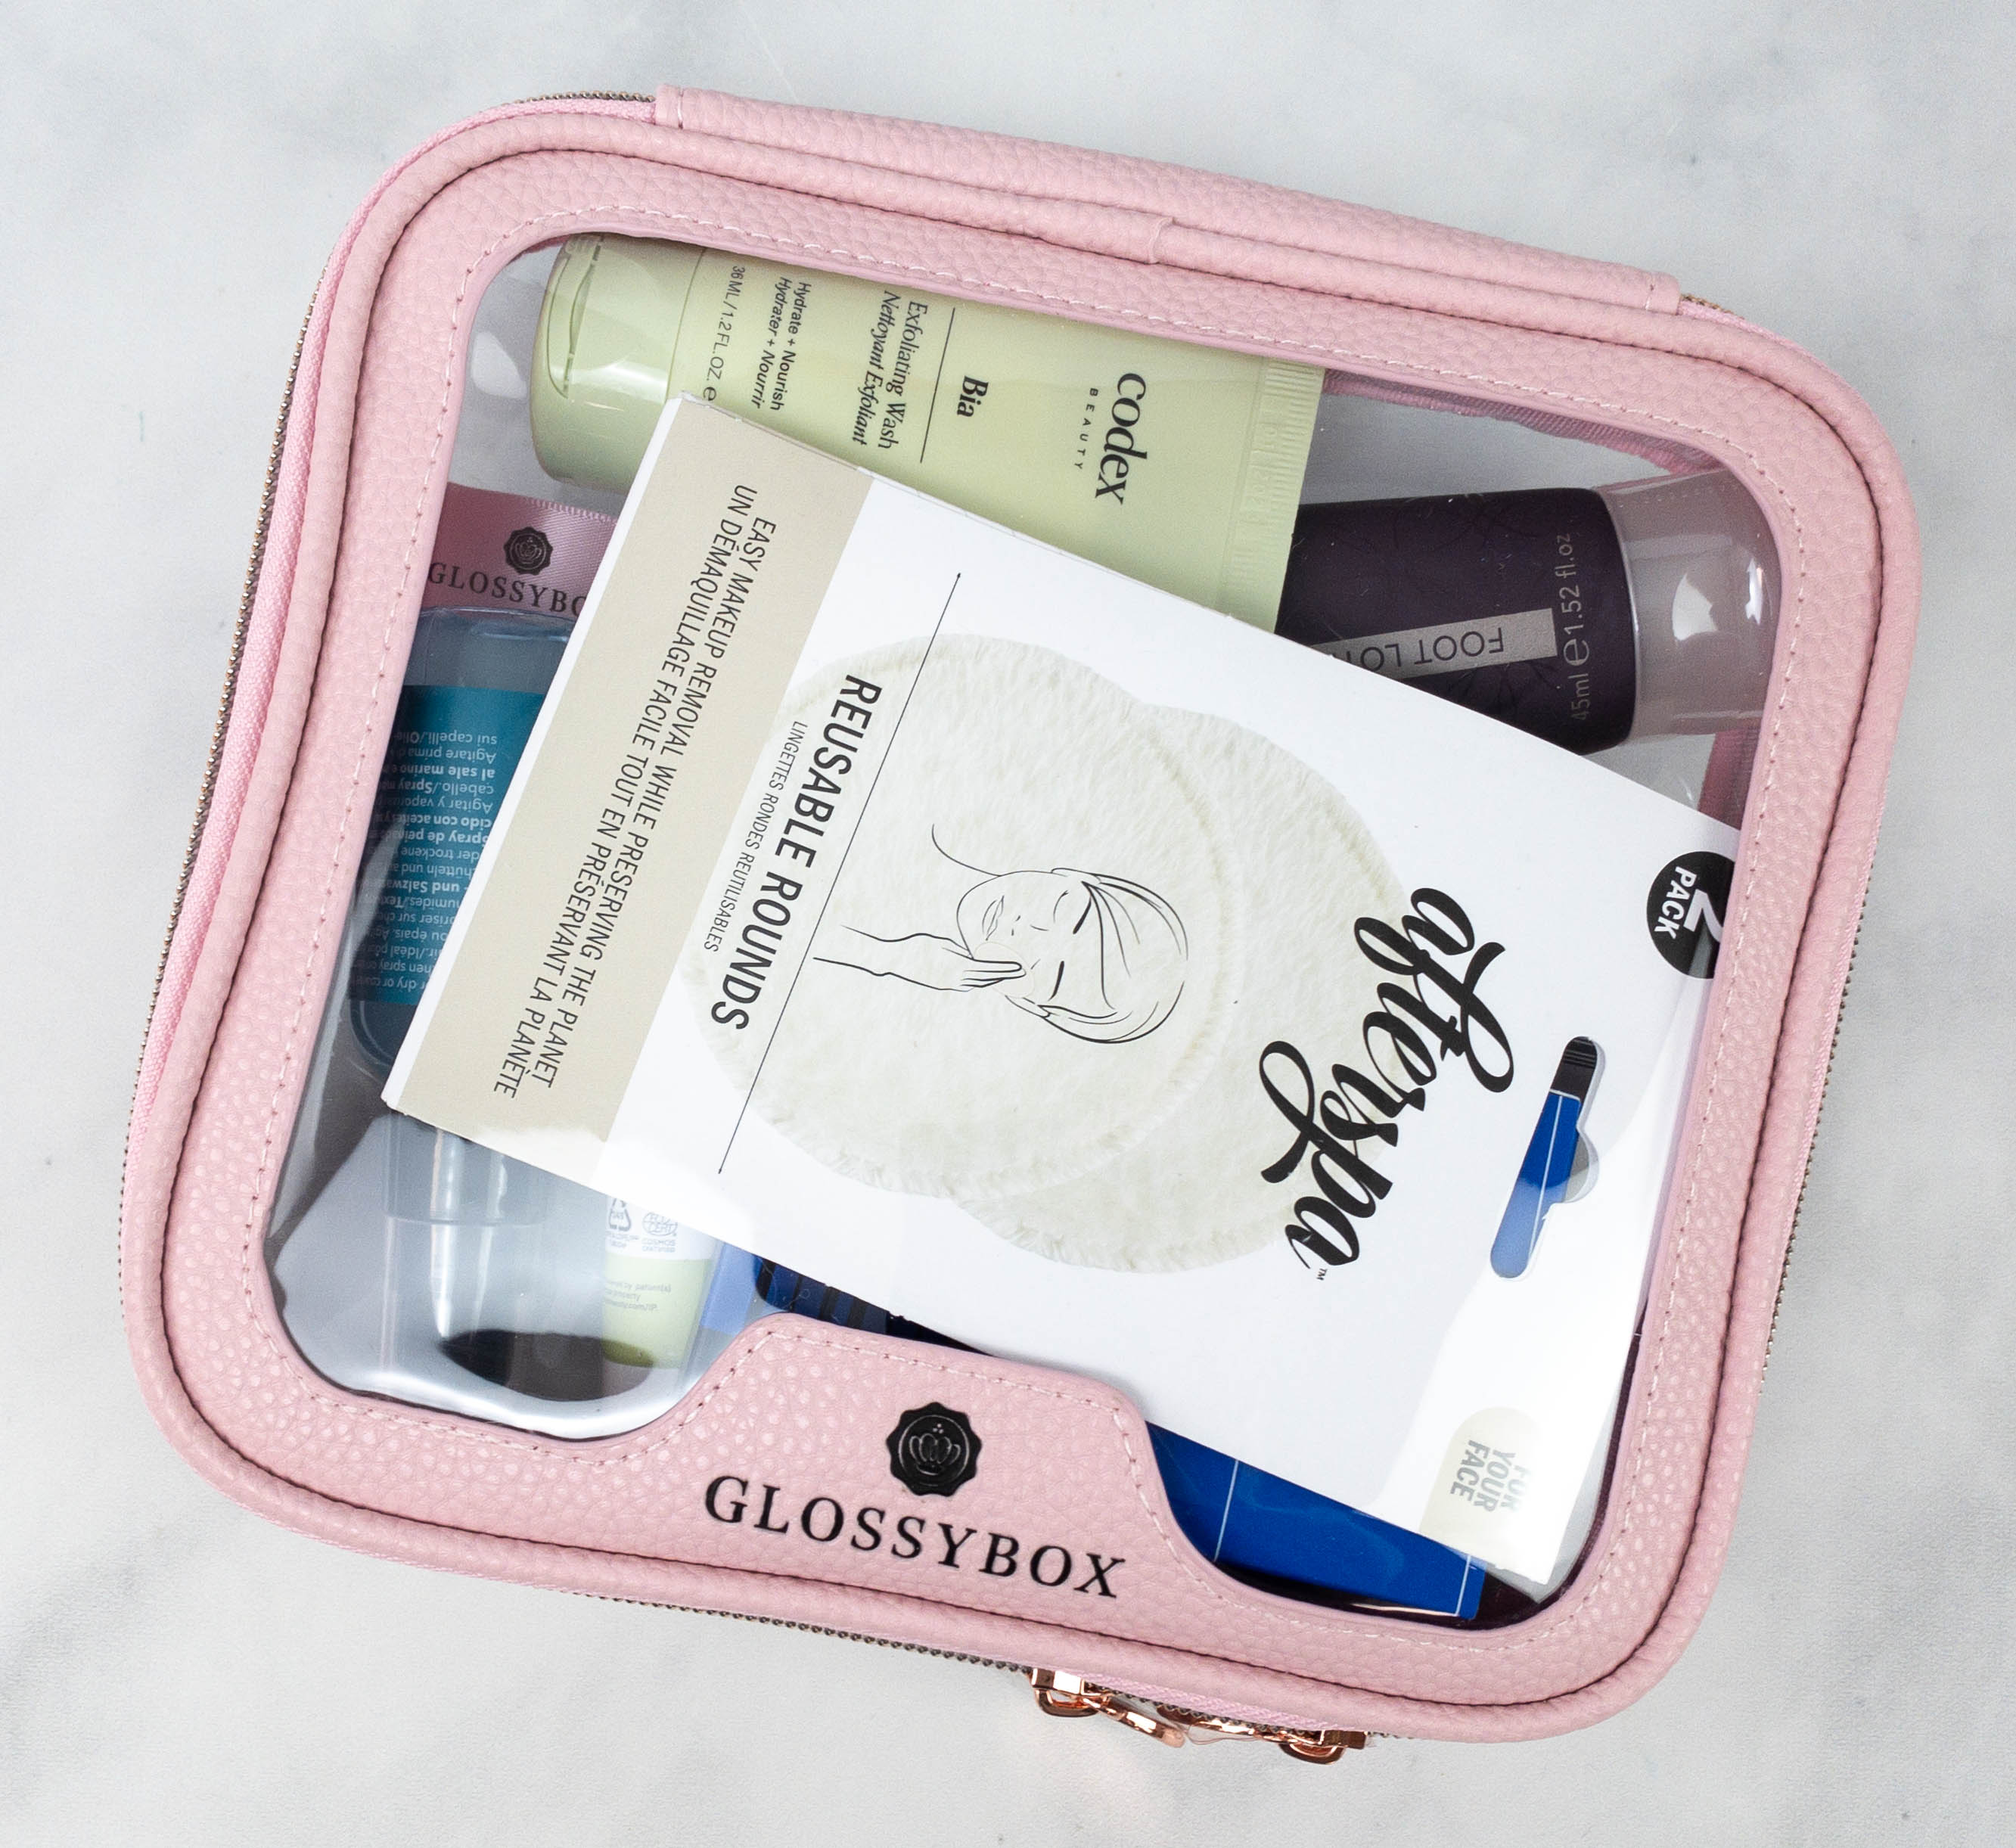 https://hellosubscription.com/wp-content/uploads/2021/06/glossybox-limited-edition-summer-2021-2.jpg?quality=90&strip=all